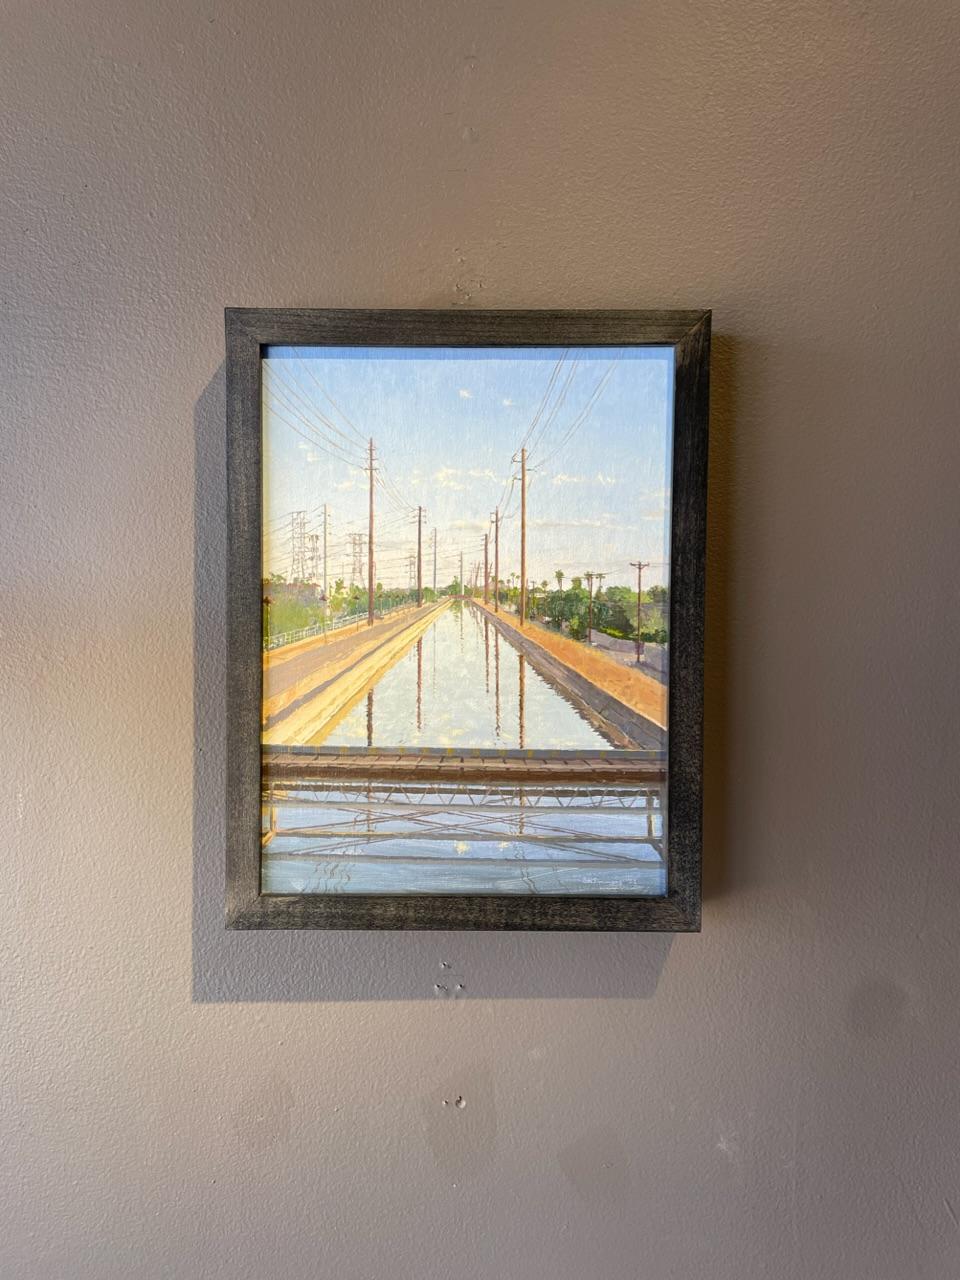 Powerlines and Reflections - Painting by Spencer Simmons